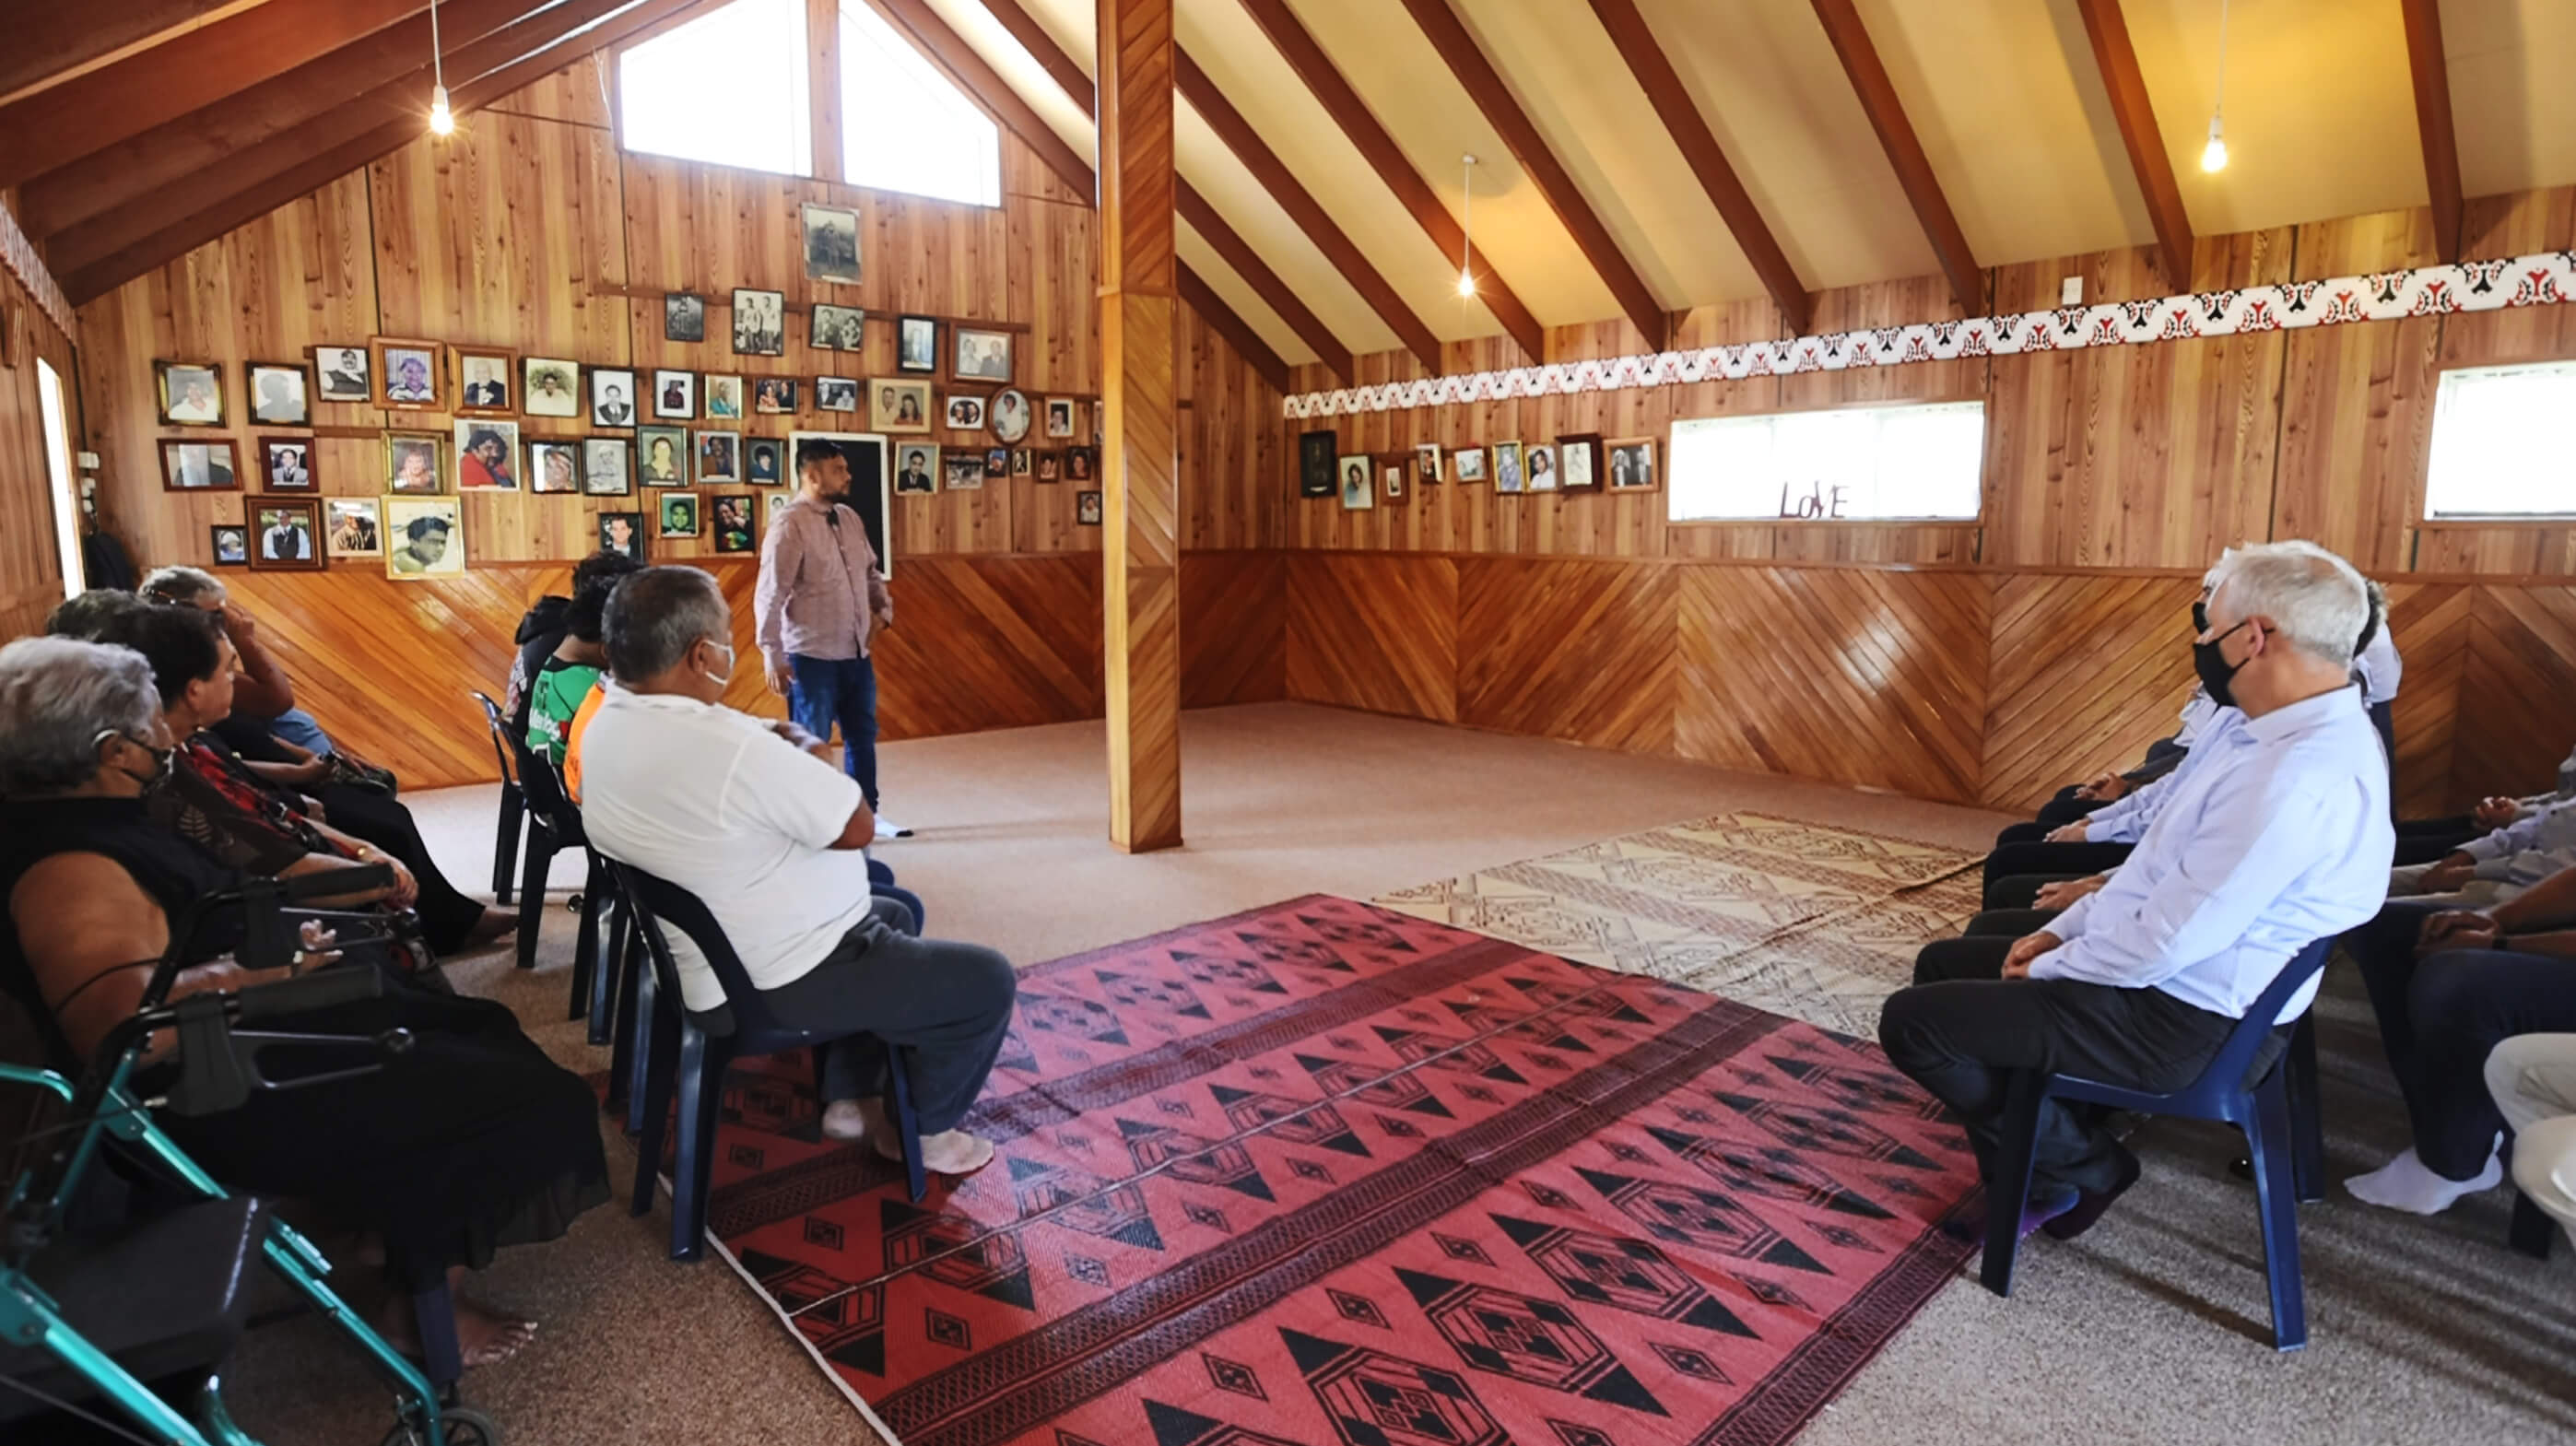 Group listening to a speaker inside a marae